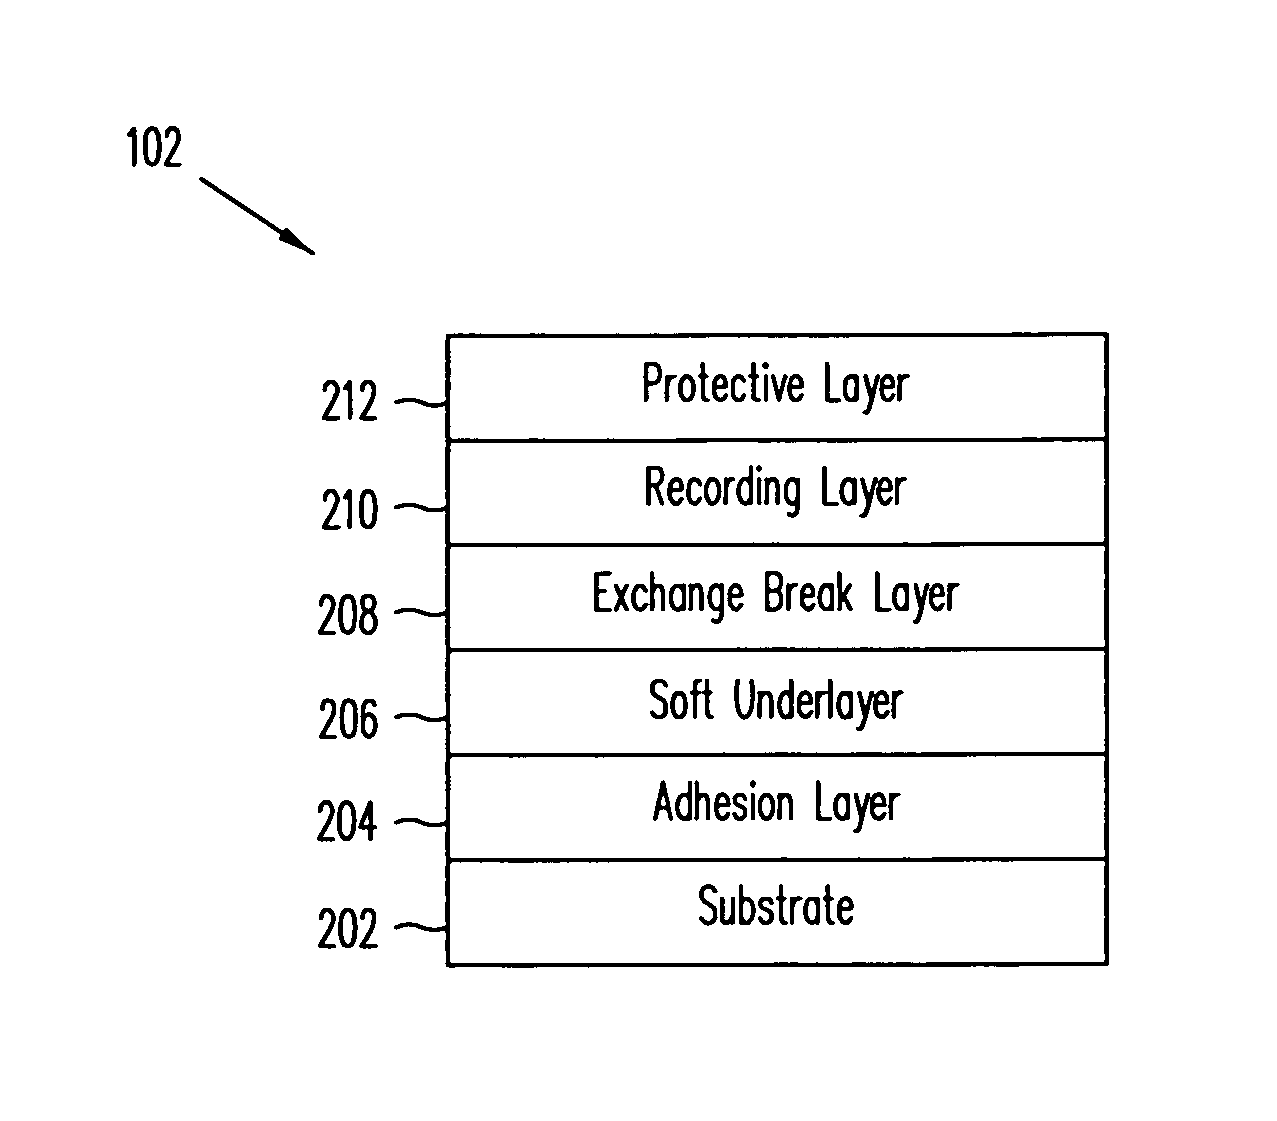 Magnetic recording capping layer with multiple layers for controlling anisotropy for perpendicular recording media